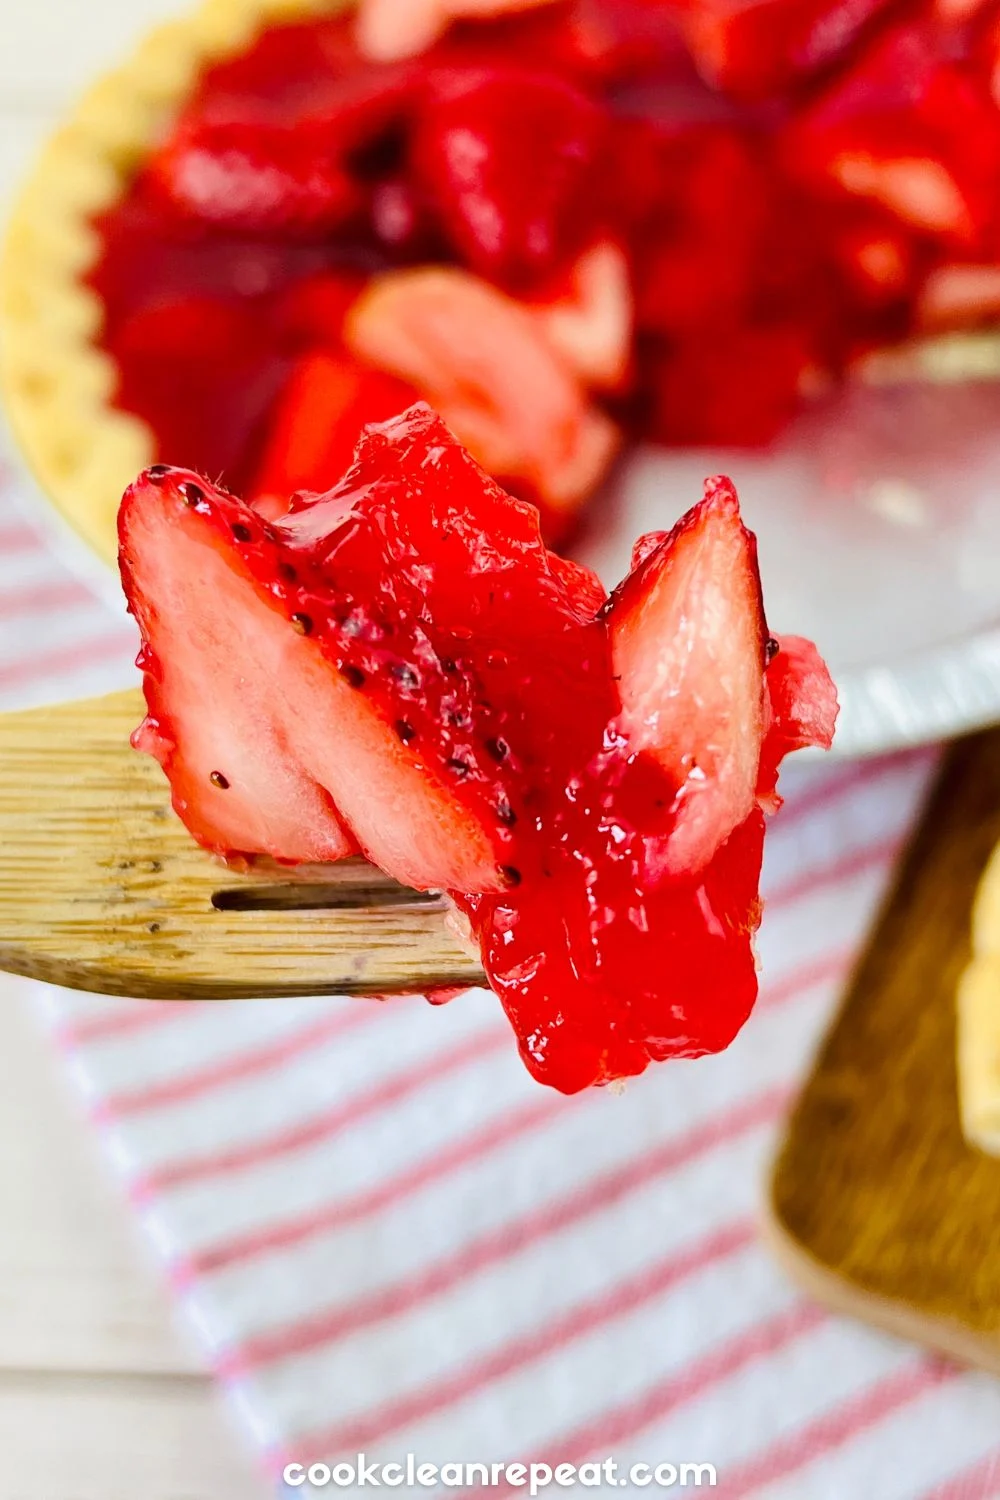 a fork holding a piece of the strawberry pie